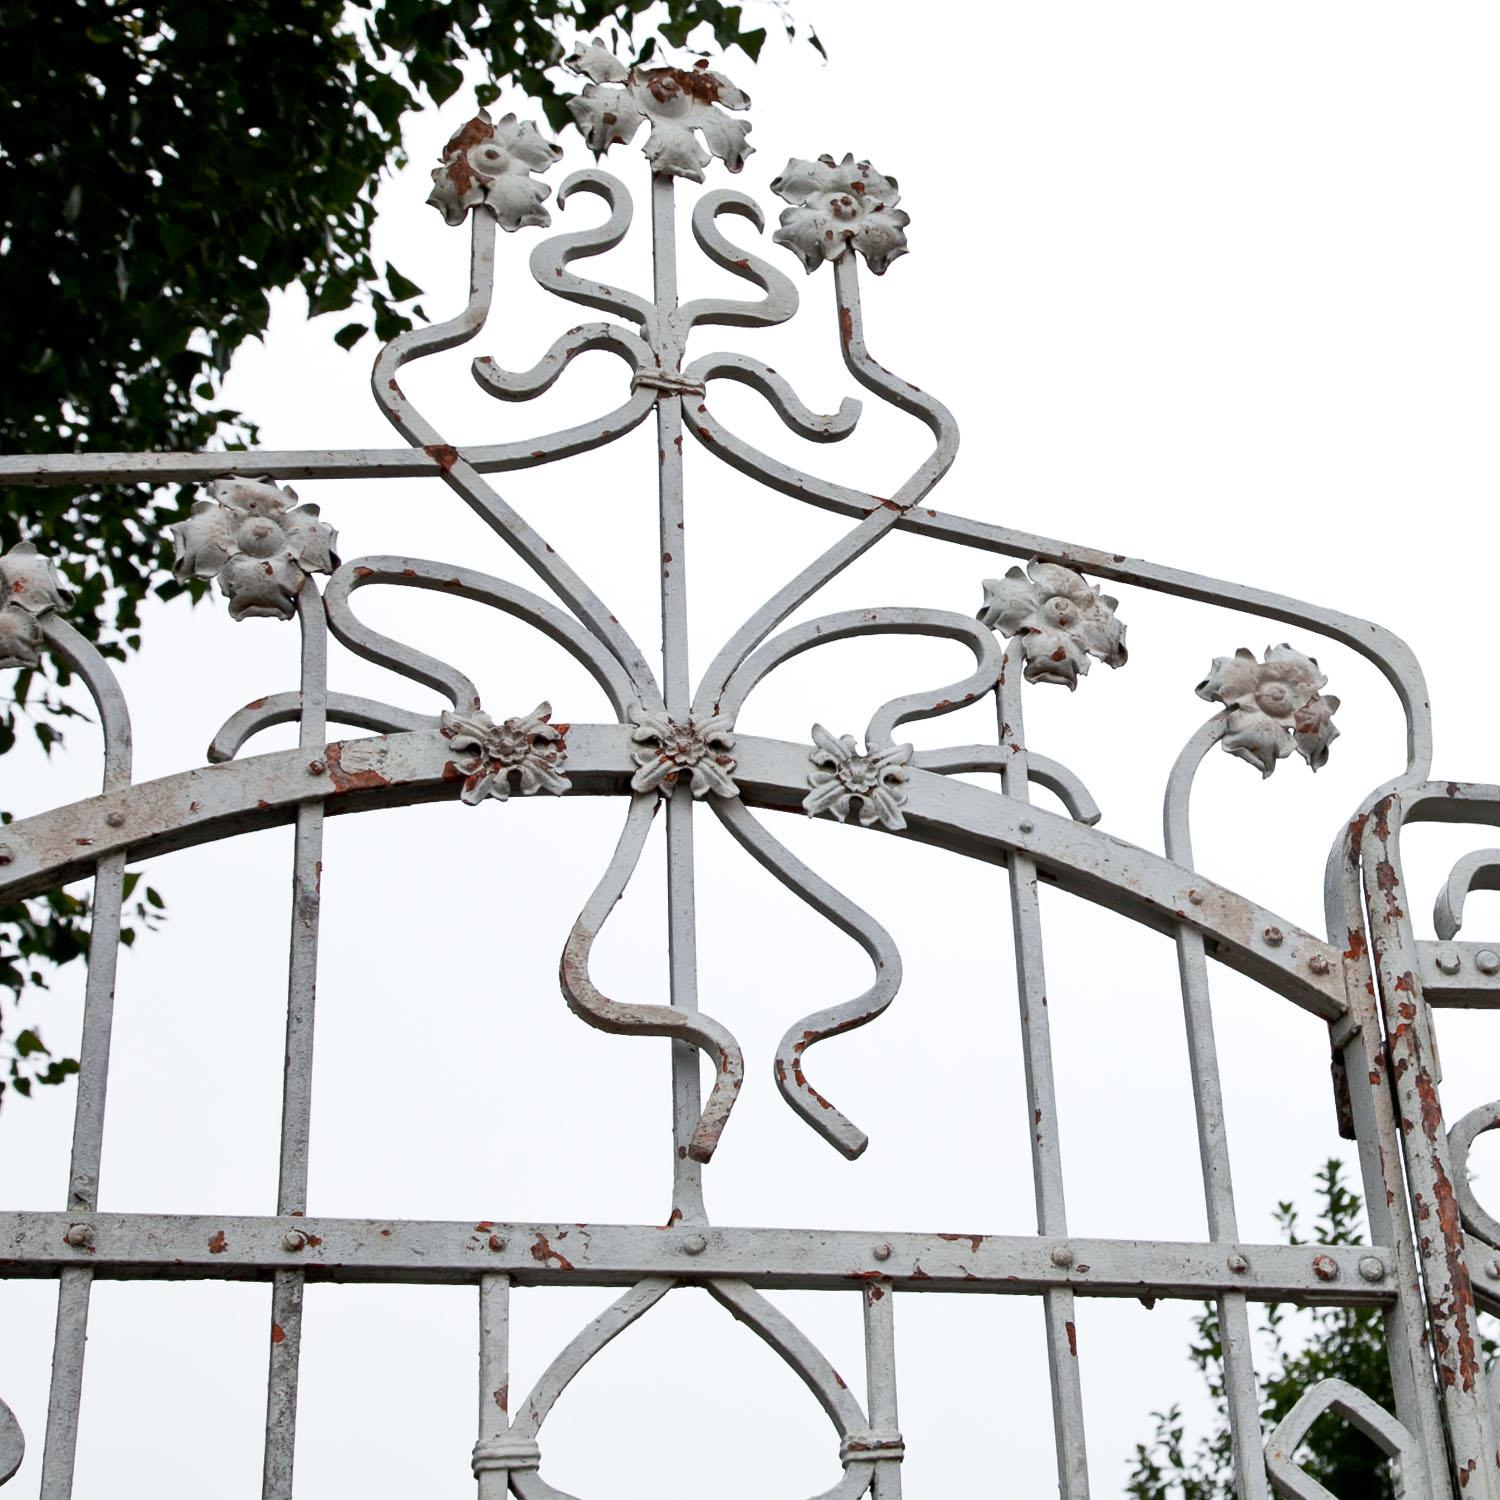 Large three-part iron gate with flower finials. The white lacquer shows signs of age and use.